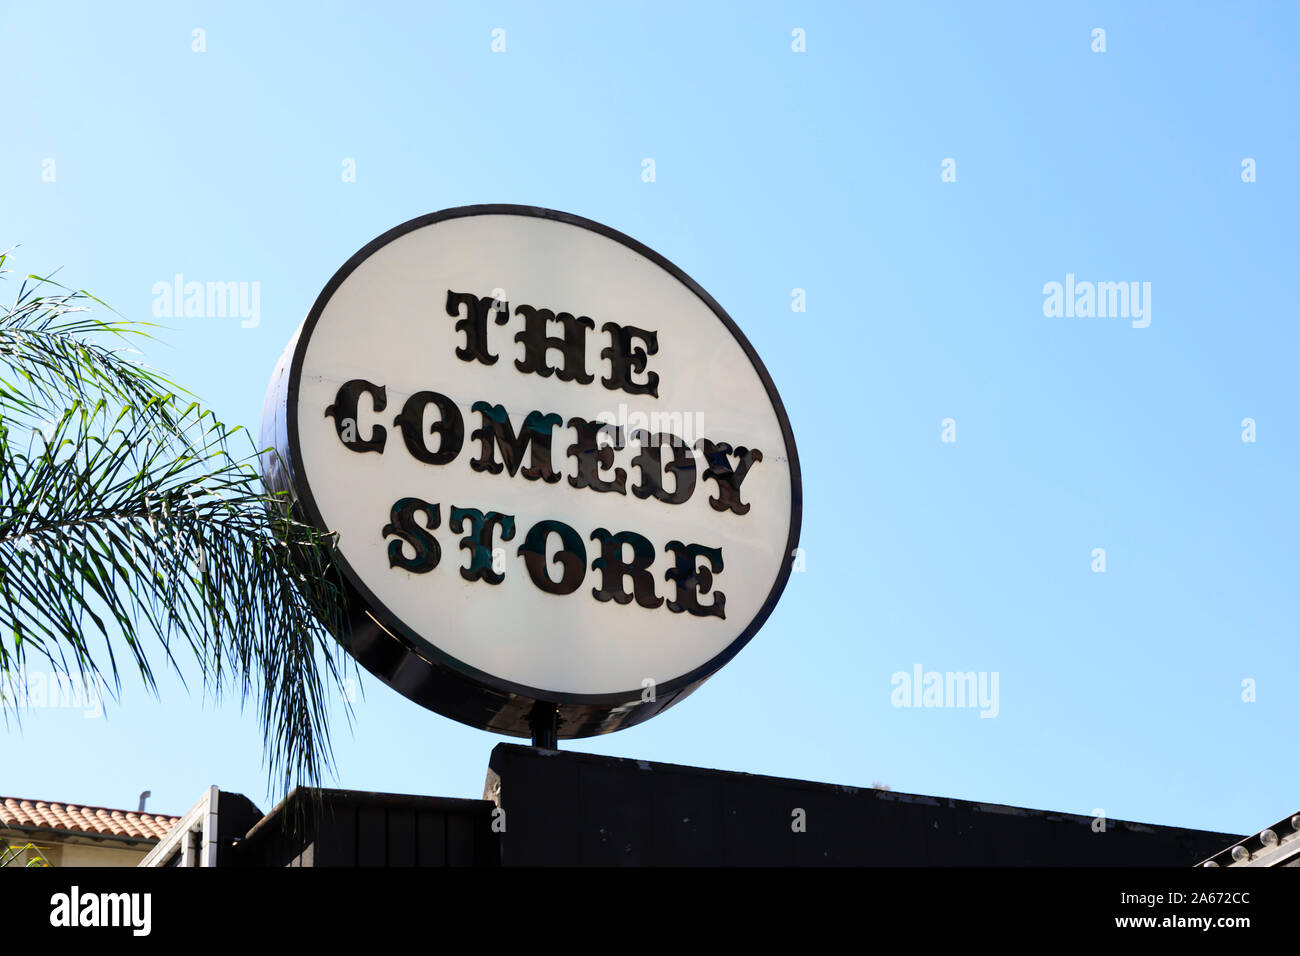 The Comedy Store sign, 8433 Sunset Boulevard, Sunset Strip, Hollywood,Los Angeles, California, United States of America. October 2019 Stock Photo